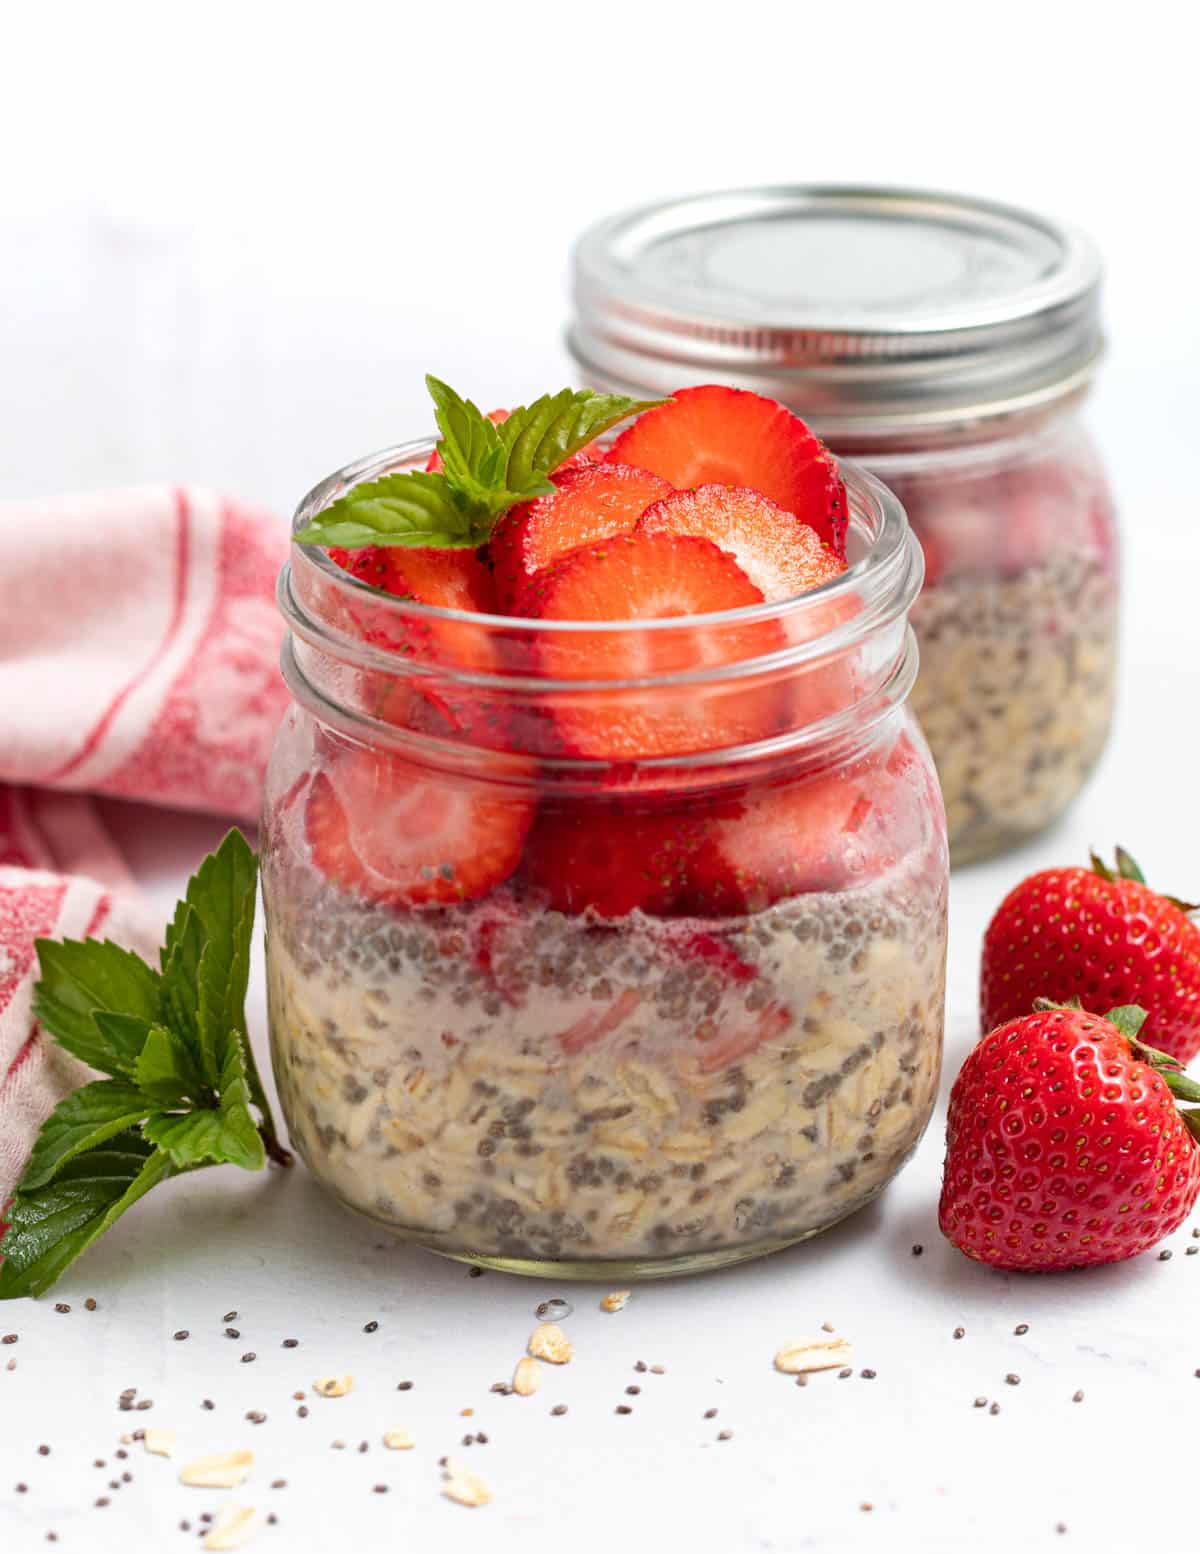 a jar of overnith oats with strawberries